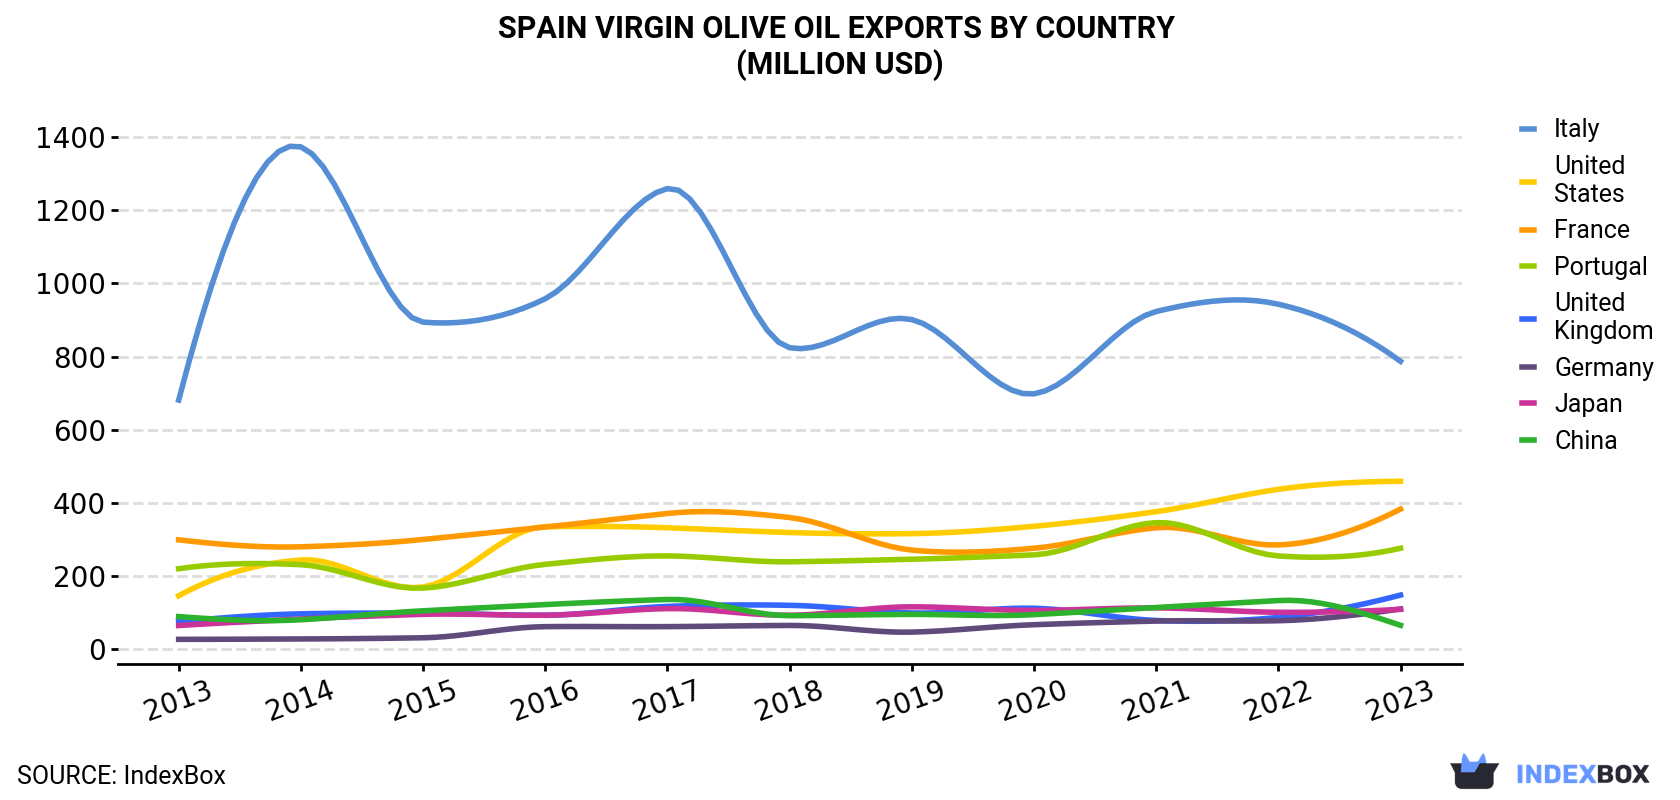 Spain Virgin Olive Oil Exports By Country (Million USD)